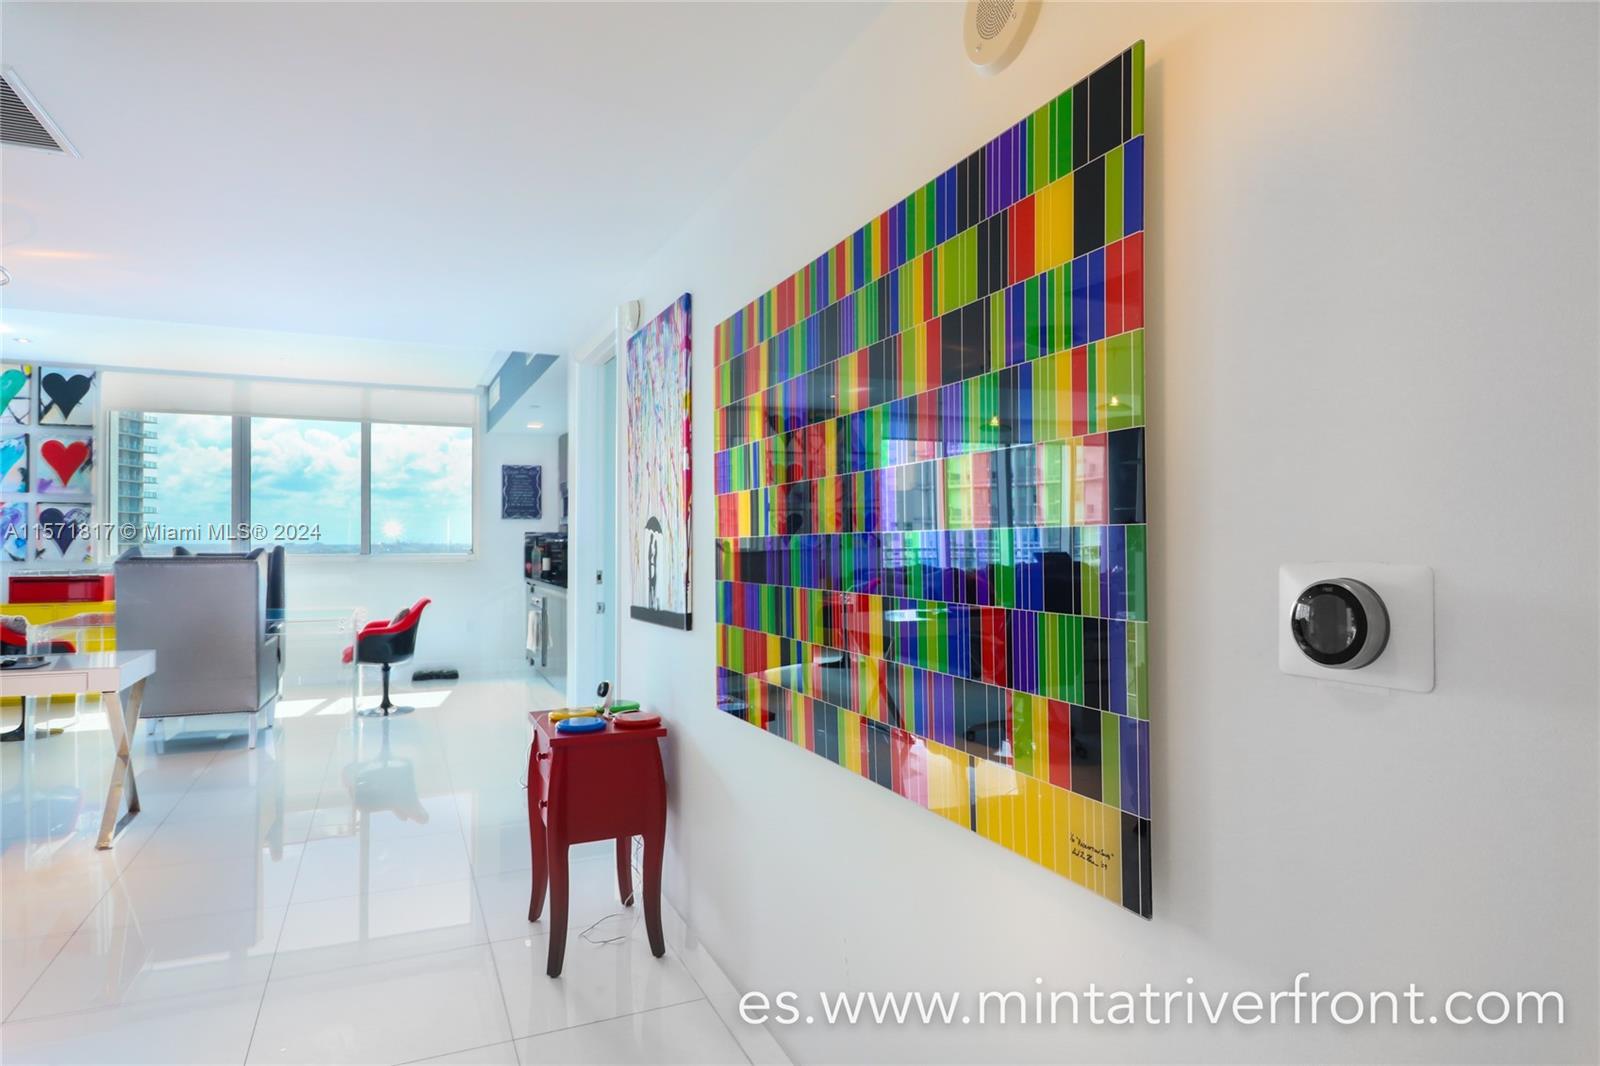 BEAUTIFUL APARTMENT LOCATED AT THE LUXURIOUS AND HIGH END MINT BUILDING.FULLY RENOVATED WITH BUILT IN CLOSETS, CERAMIC FLOORS, NEW EUROPEAN KITCHEN, SOFFITS, LED LIGHTS, AND MORE. BE PART OF THE RIVERFRONT COMMUNITY WHICH IS THE ONLY GATED COMMUNITY IN BRICKELL AREA. AVOID BRICKELL TRAFFIC IN THIS AMAZING LOCATION WITH IMMEDIATE ACCESS TO I-95 WHILE STILL BEING ABLE TO ENJOY ALL THAT BRICKELL HAS TO OFFER. BASIC CABLE AND HIGH SPEED INTERNET INCLUDED IN THE RENT!